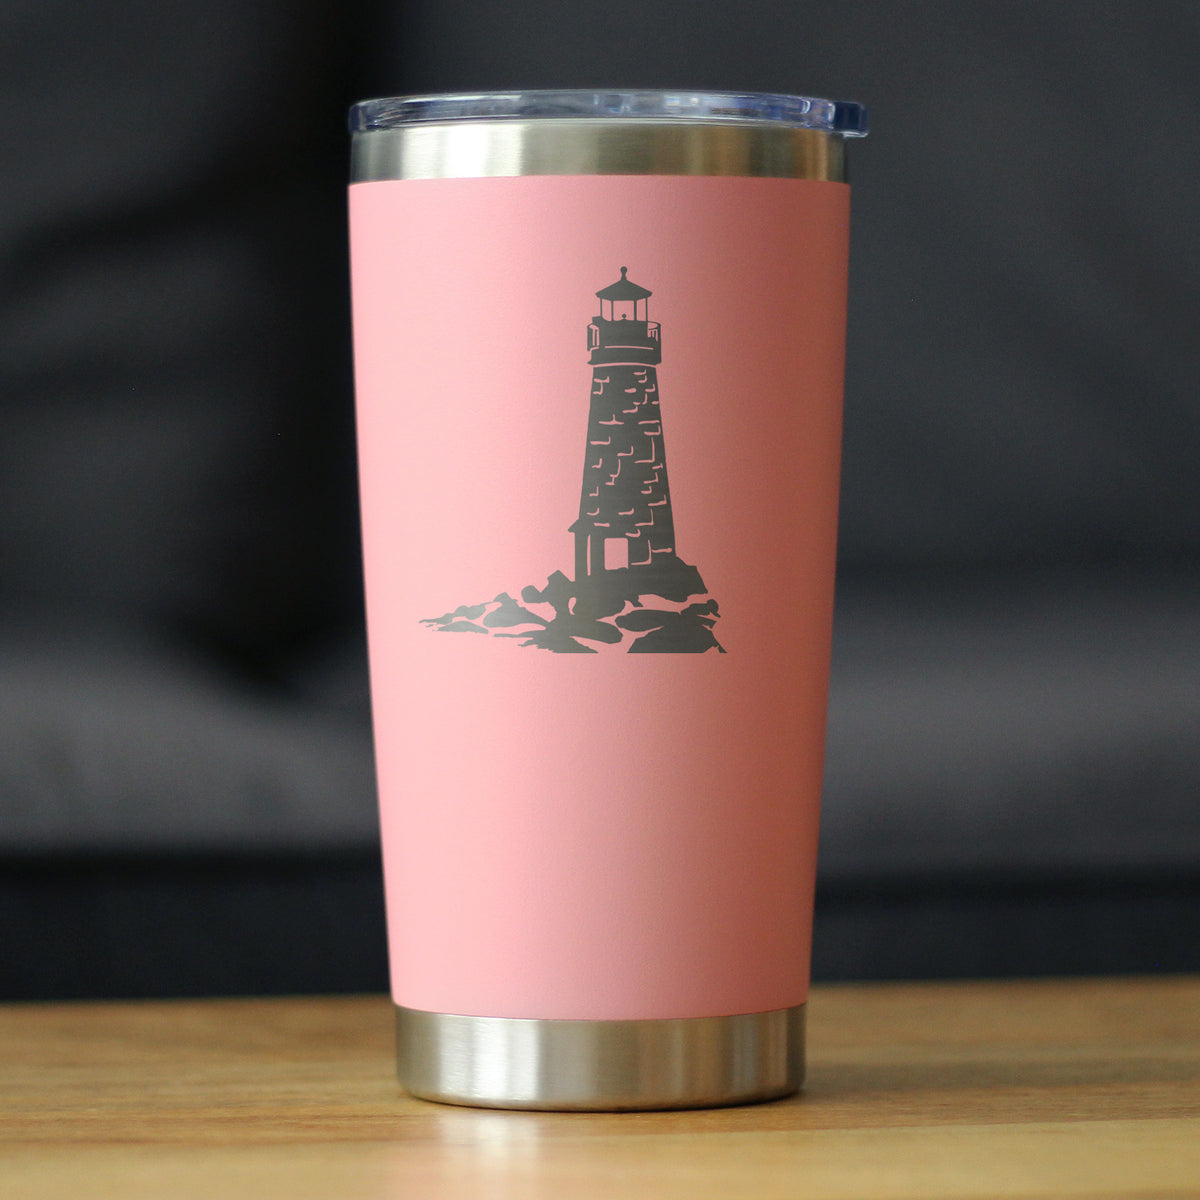 Lighthouse - Insulated Coffee Tumbler Cup with Sliding Lid - Stainless Steel Travel Mug - Beach Gifts and Decor for Women and Men